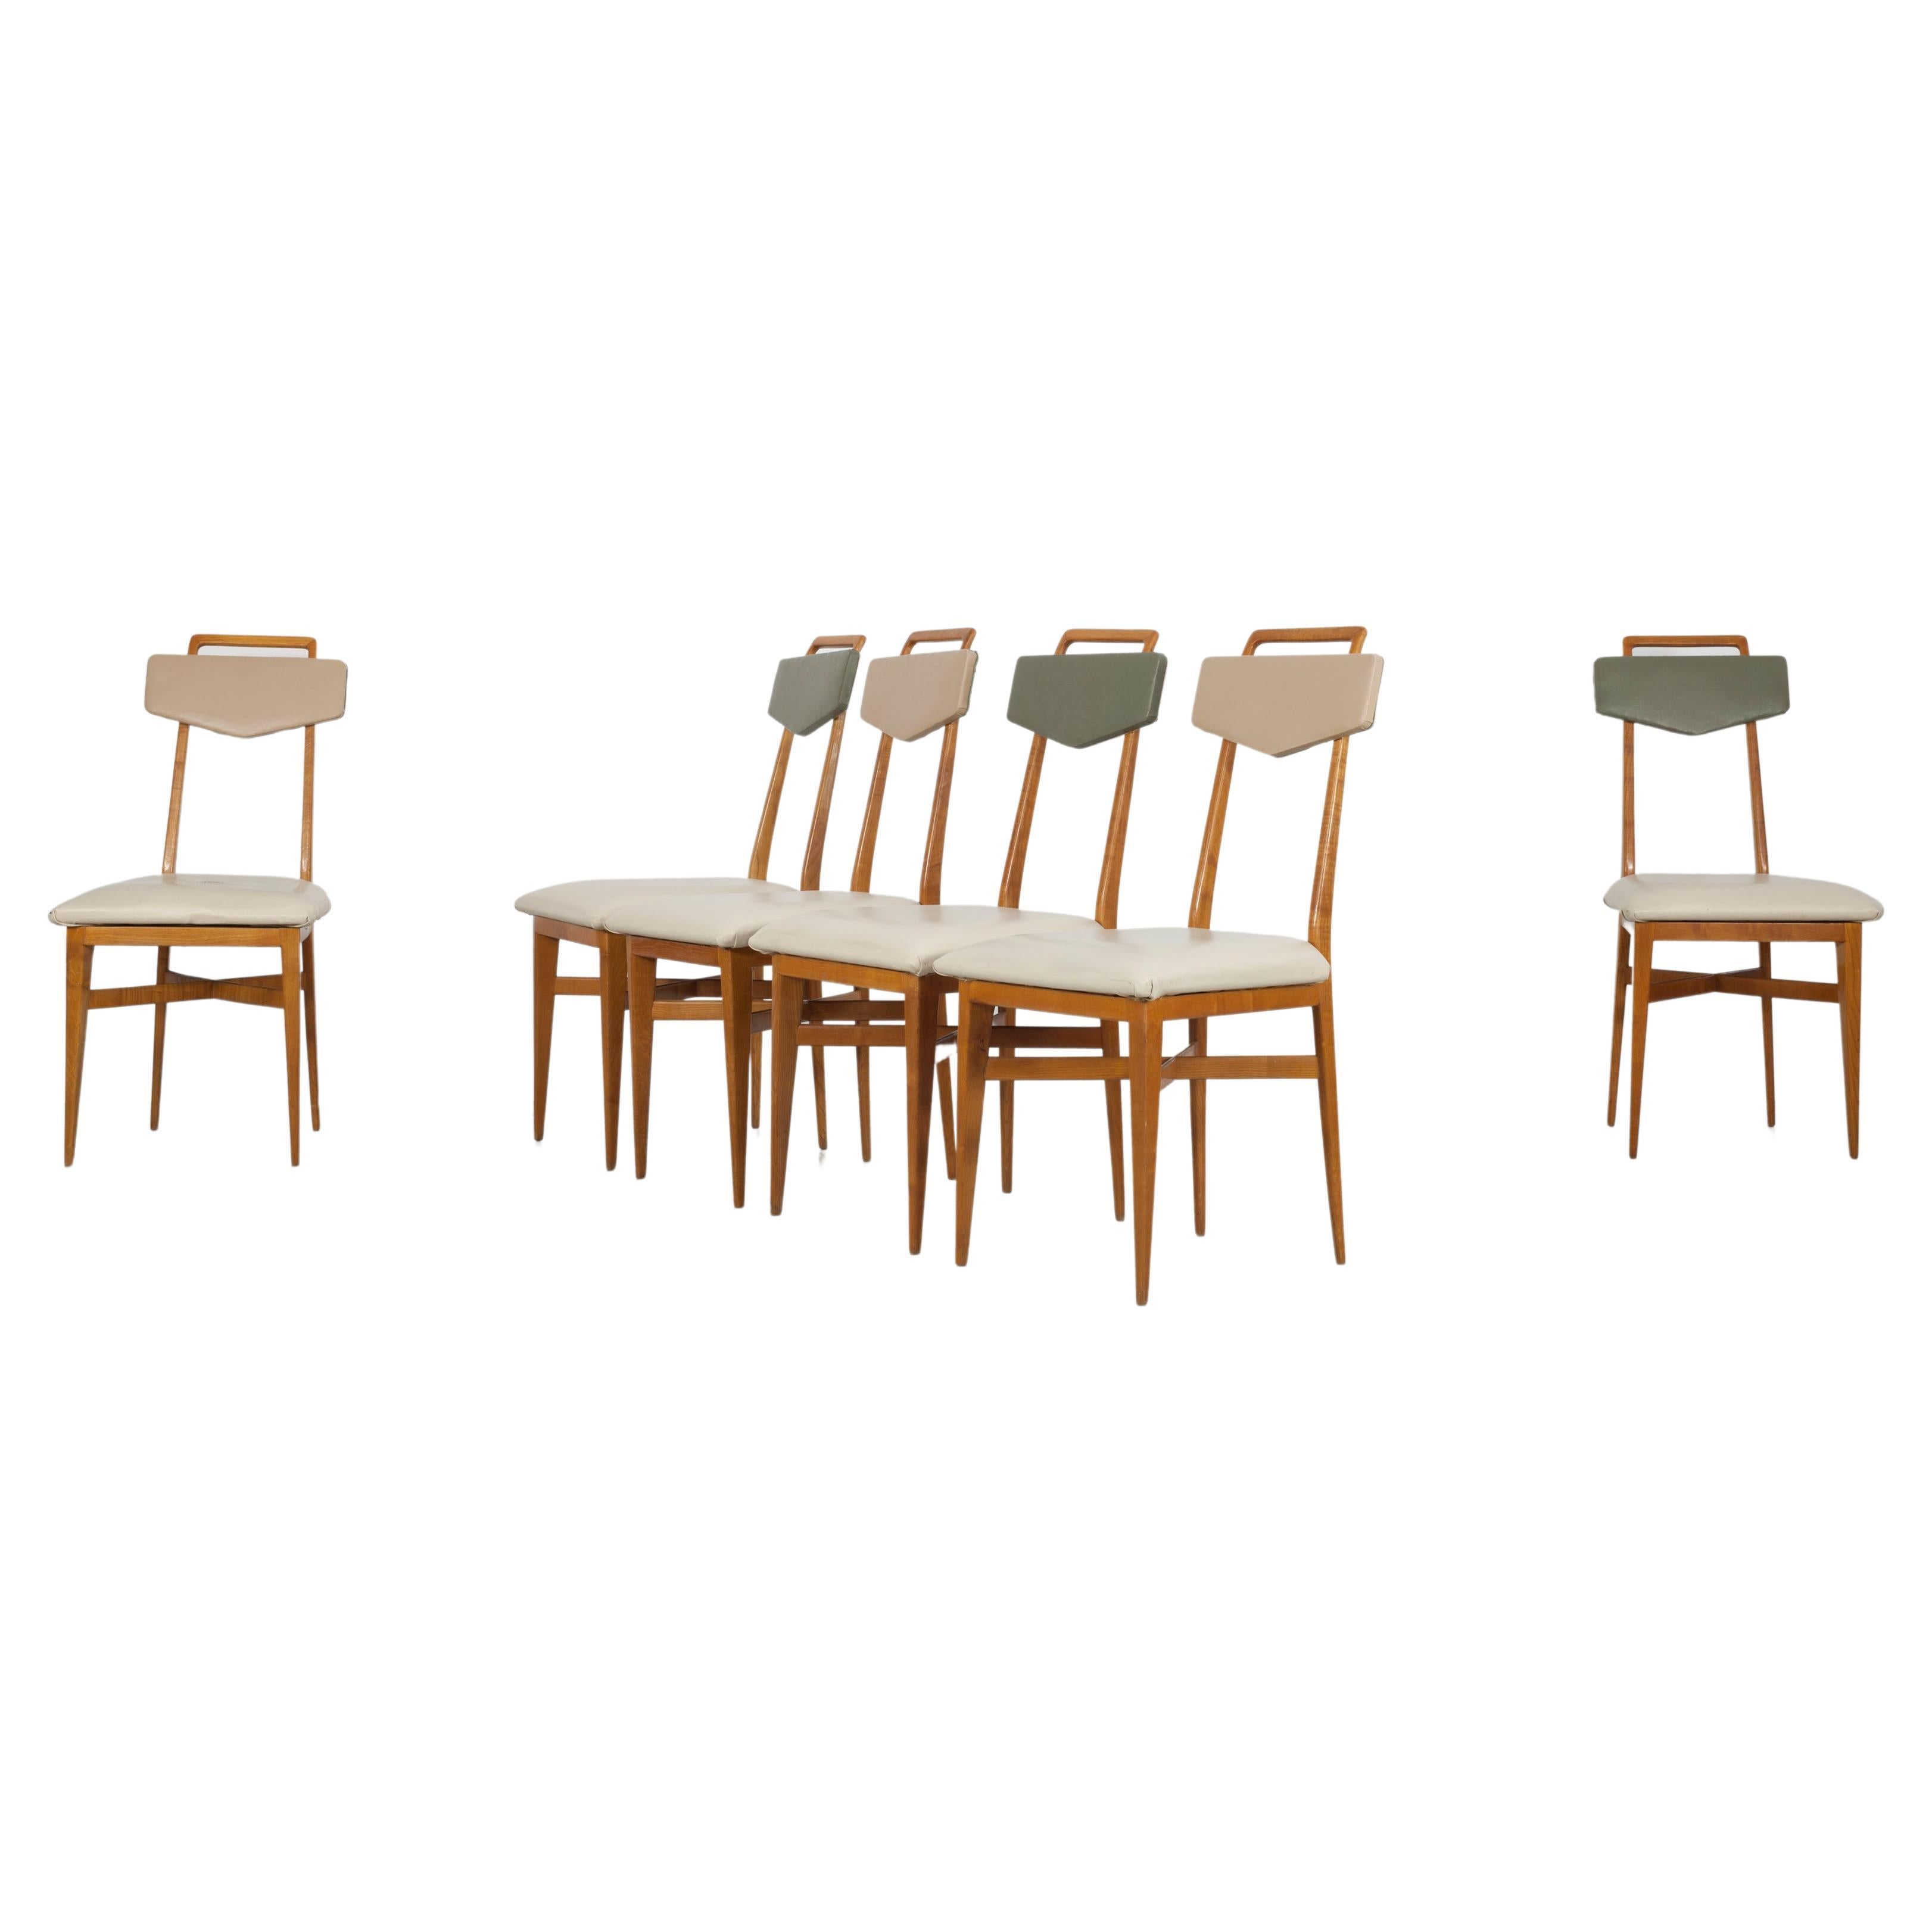 Set of 6 Scuola Torinese Chairs, Italy, 1950s For Sale